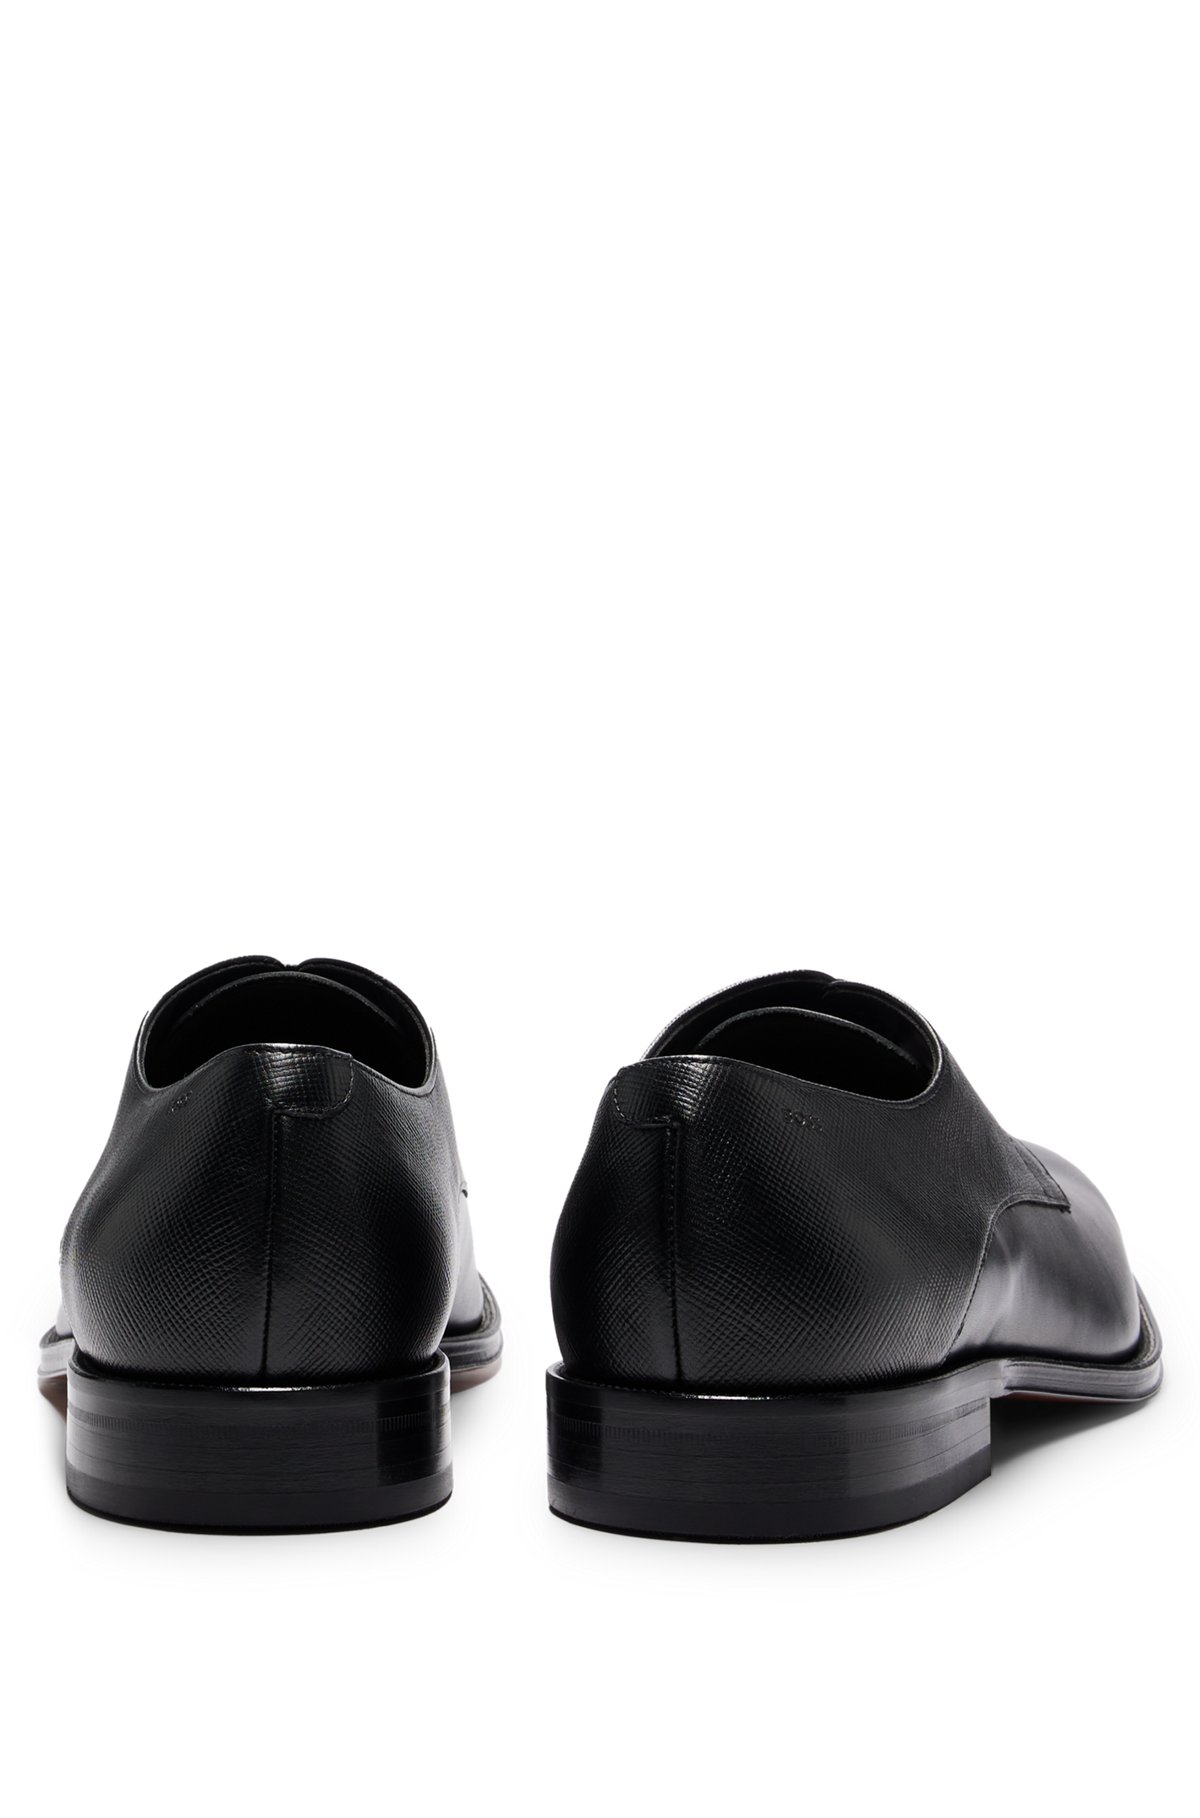 Italian-made Derby shoes in smooth and printed leather, Black